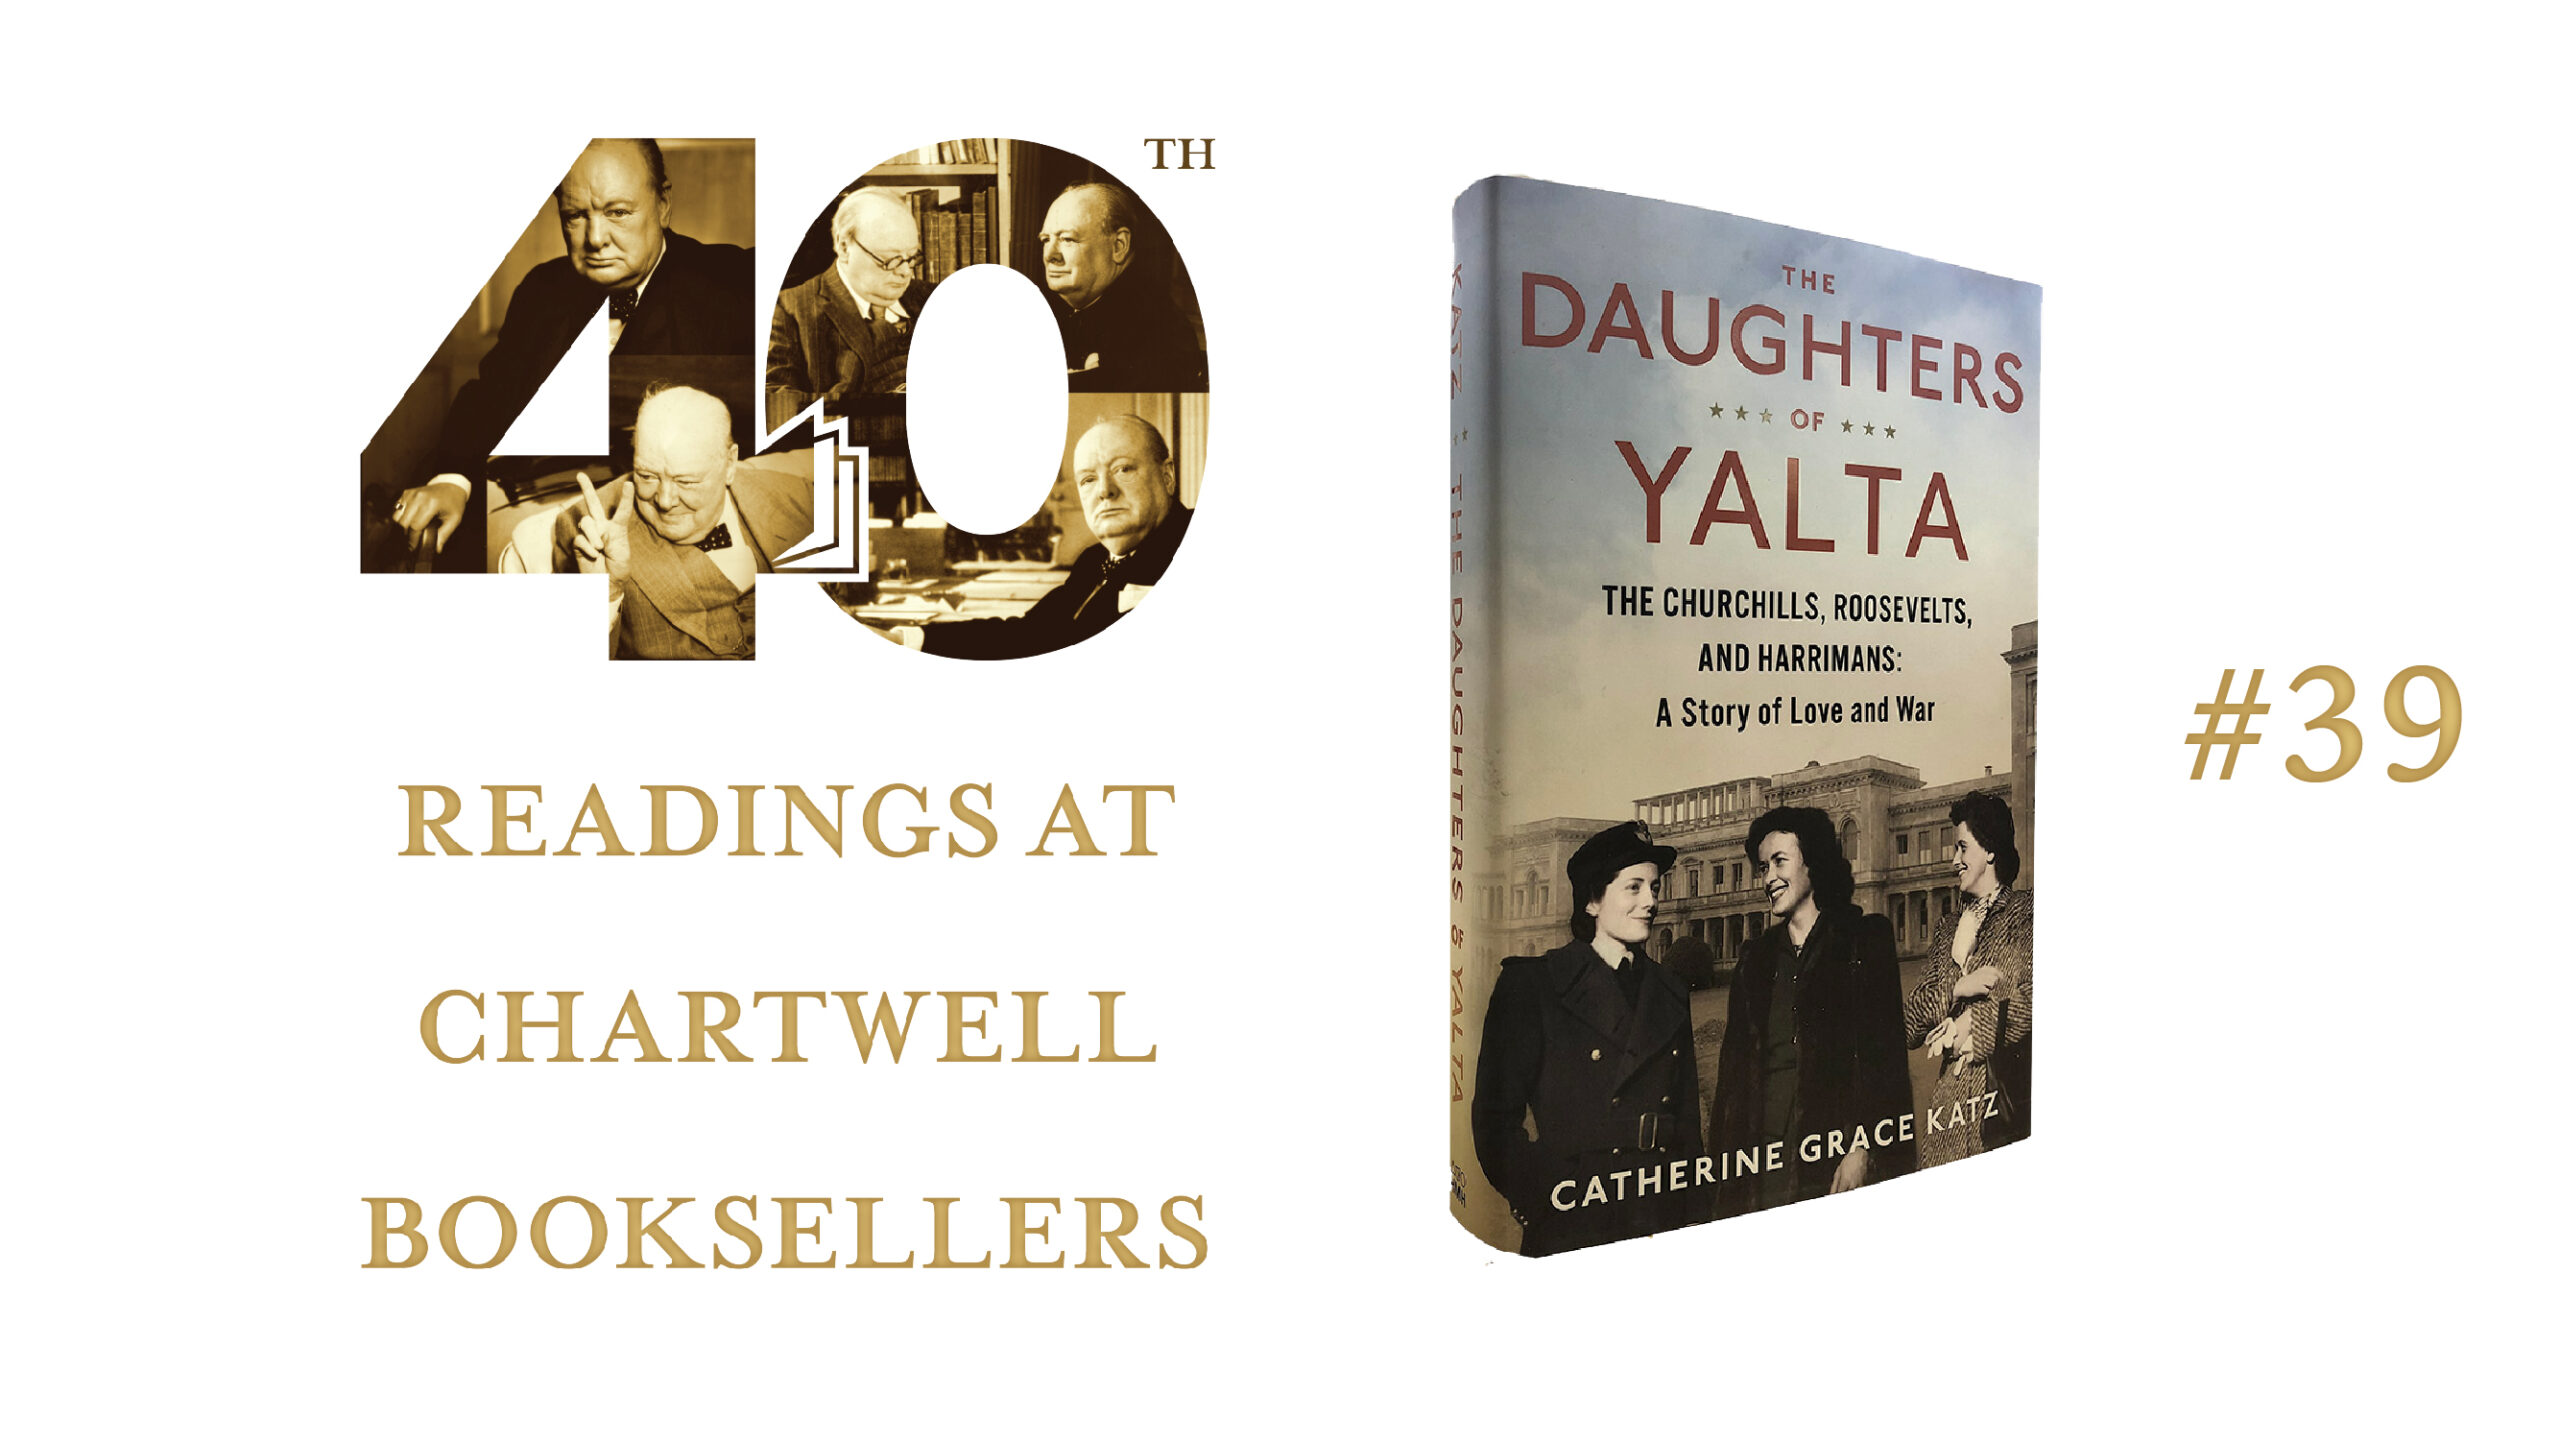 WATCH AUTHOR CATHERINE GRACE KATZ READ “THE DAUGHTERS OF YALTA”